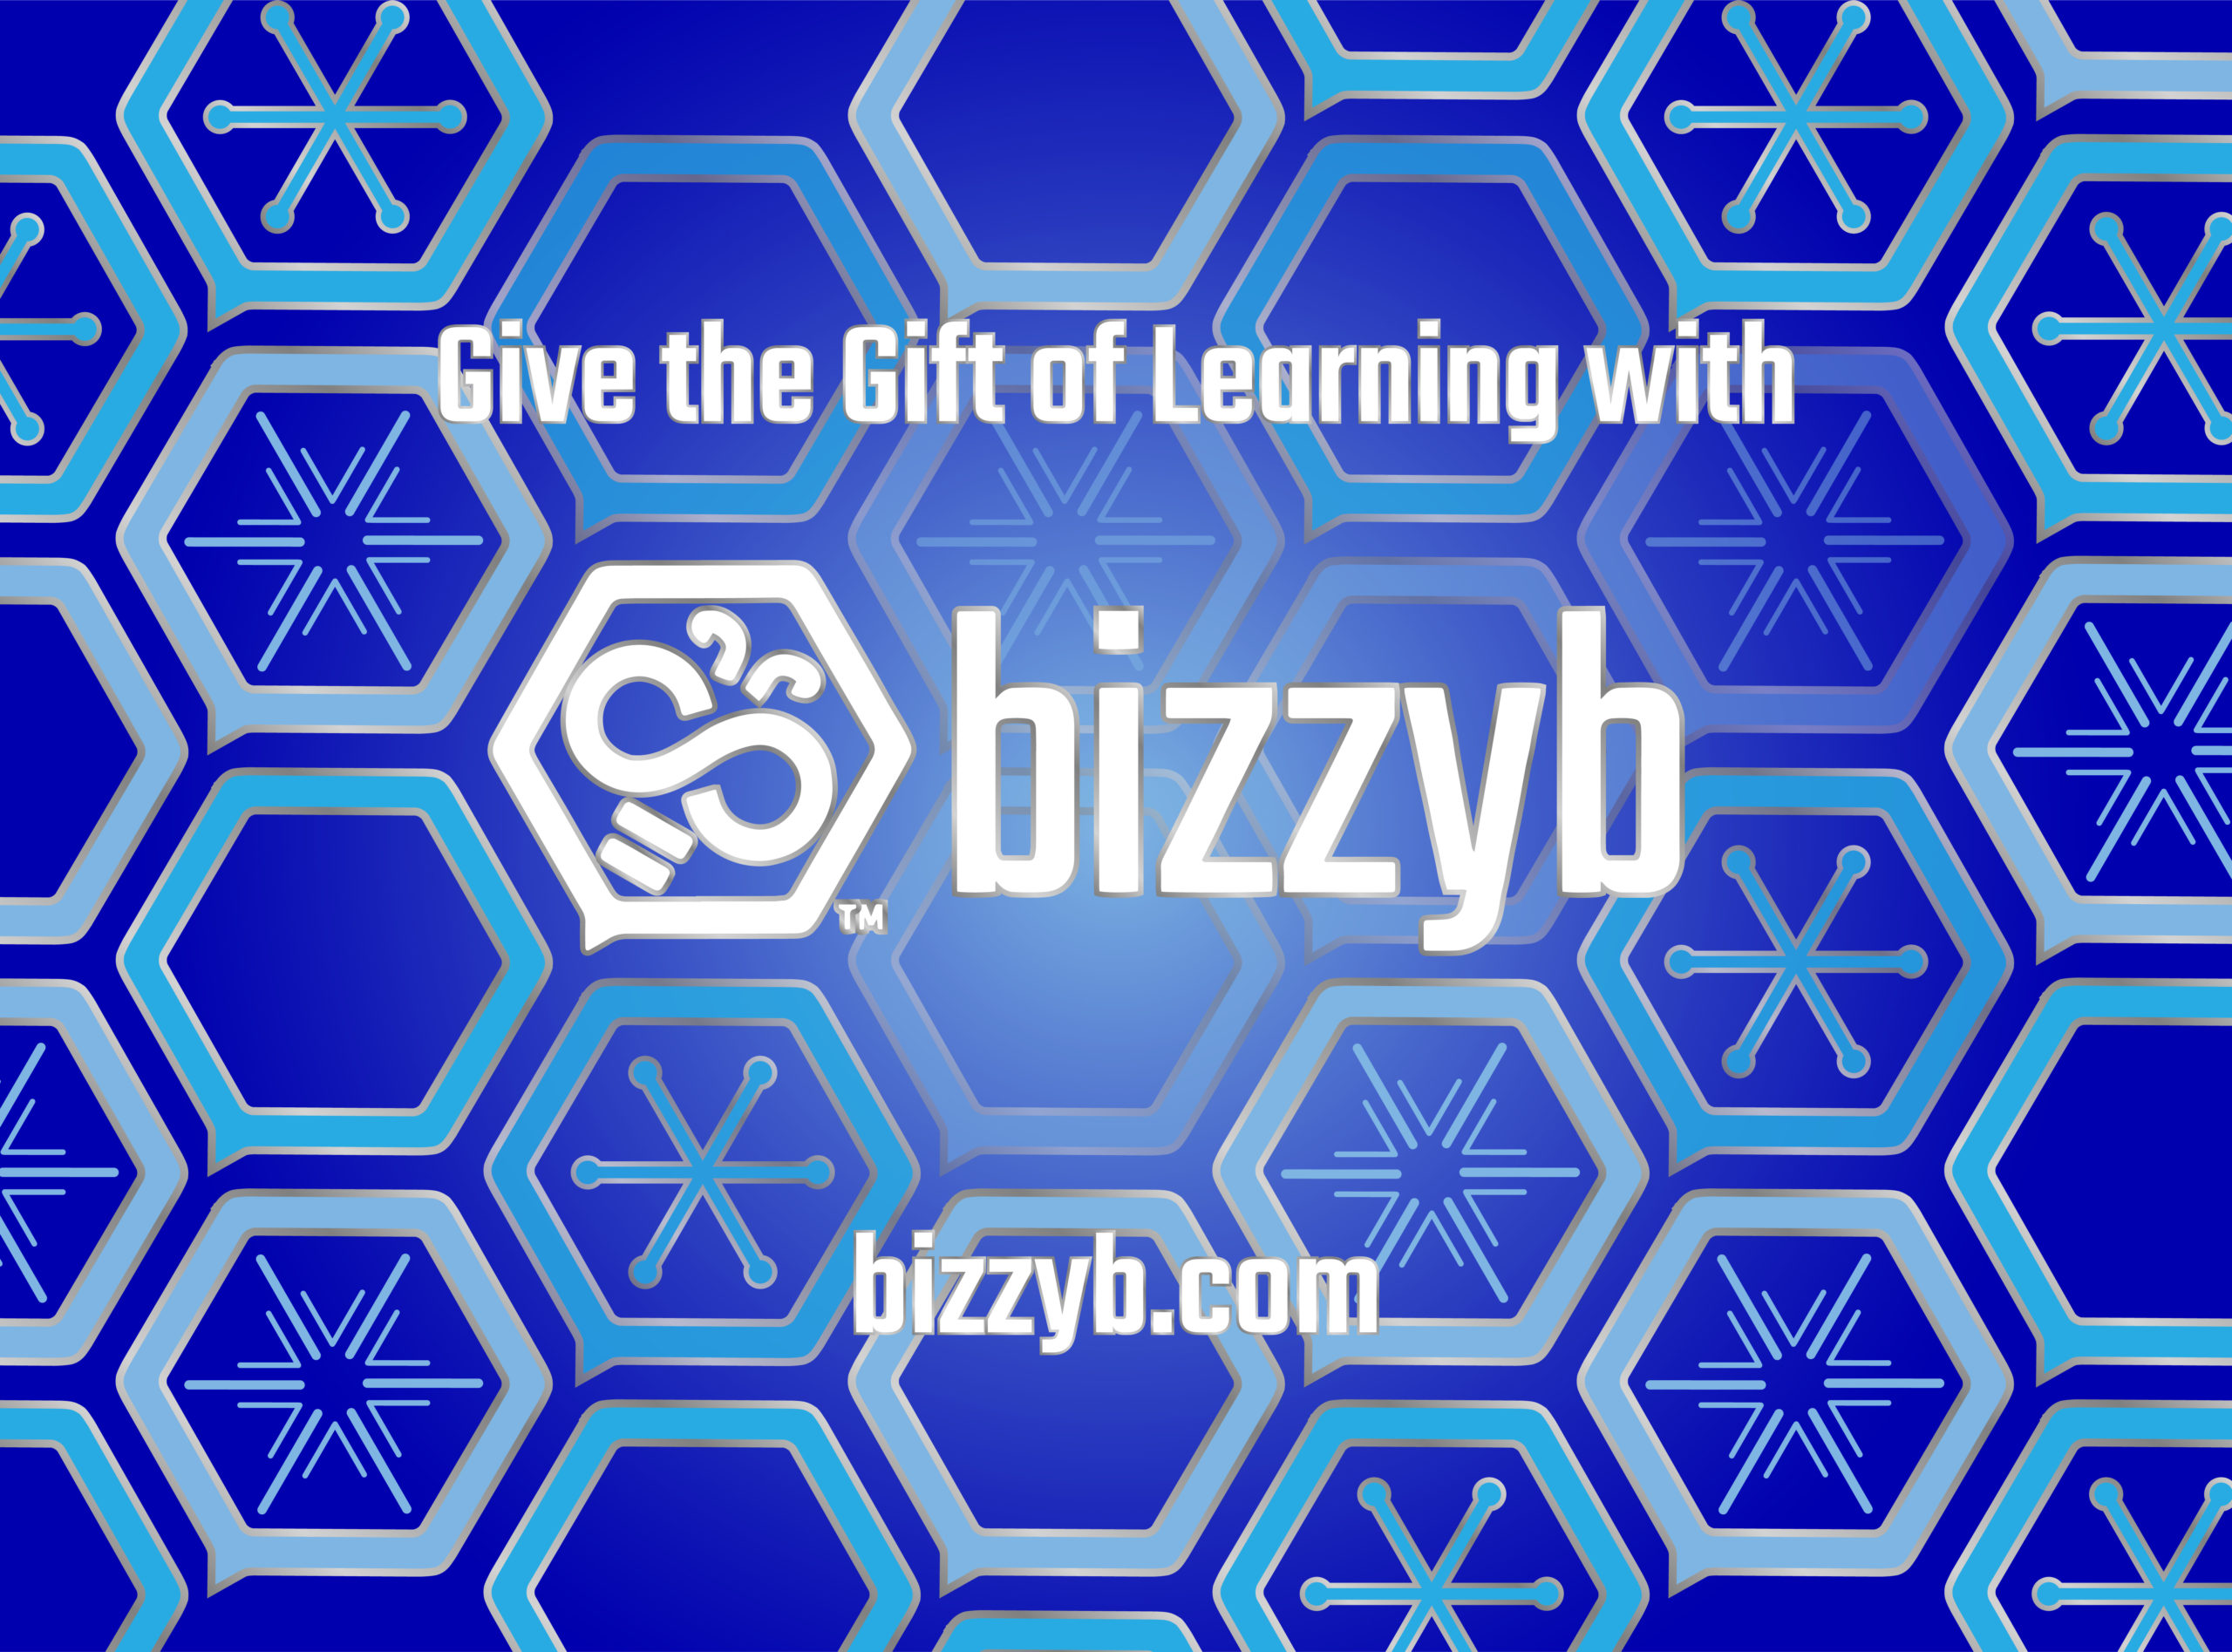 Holiday "Give the Gift of Learning with bizzyb" graphic